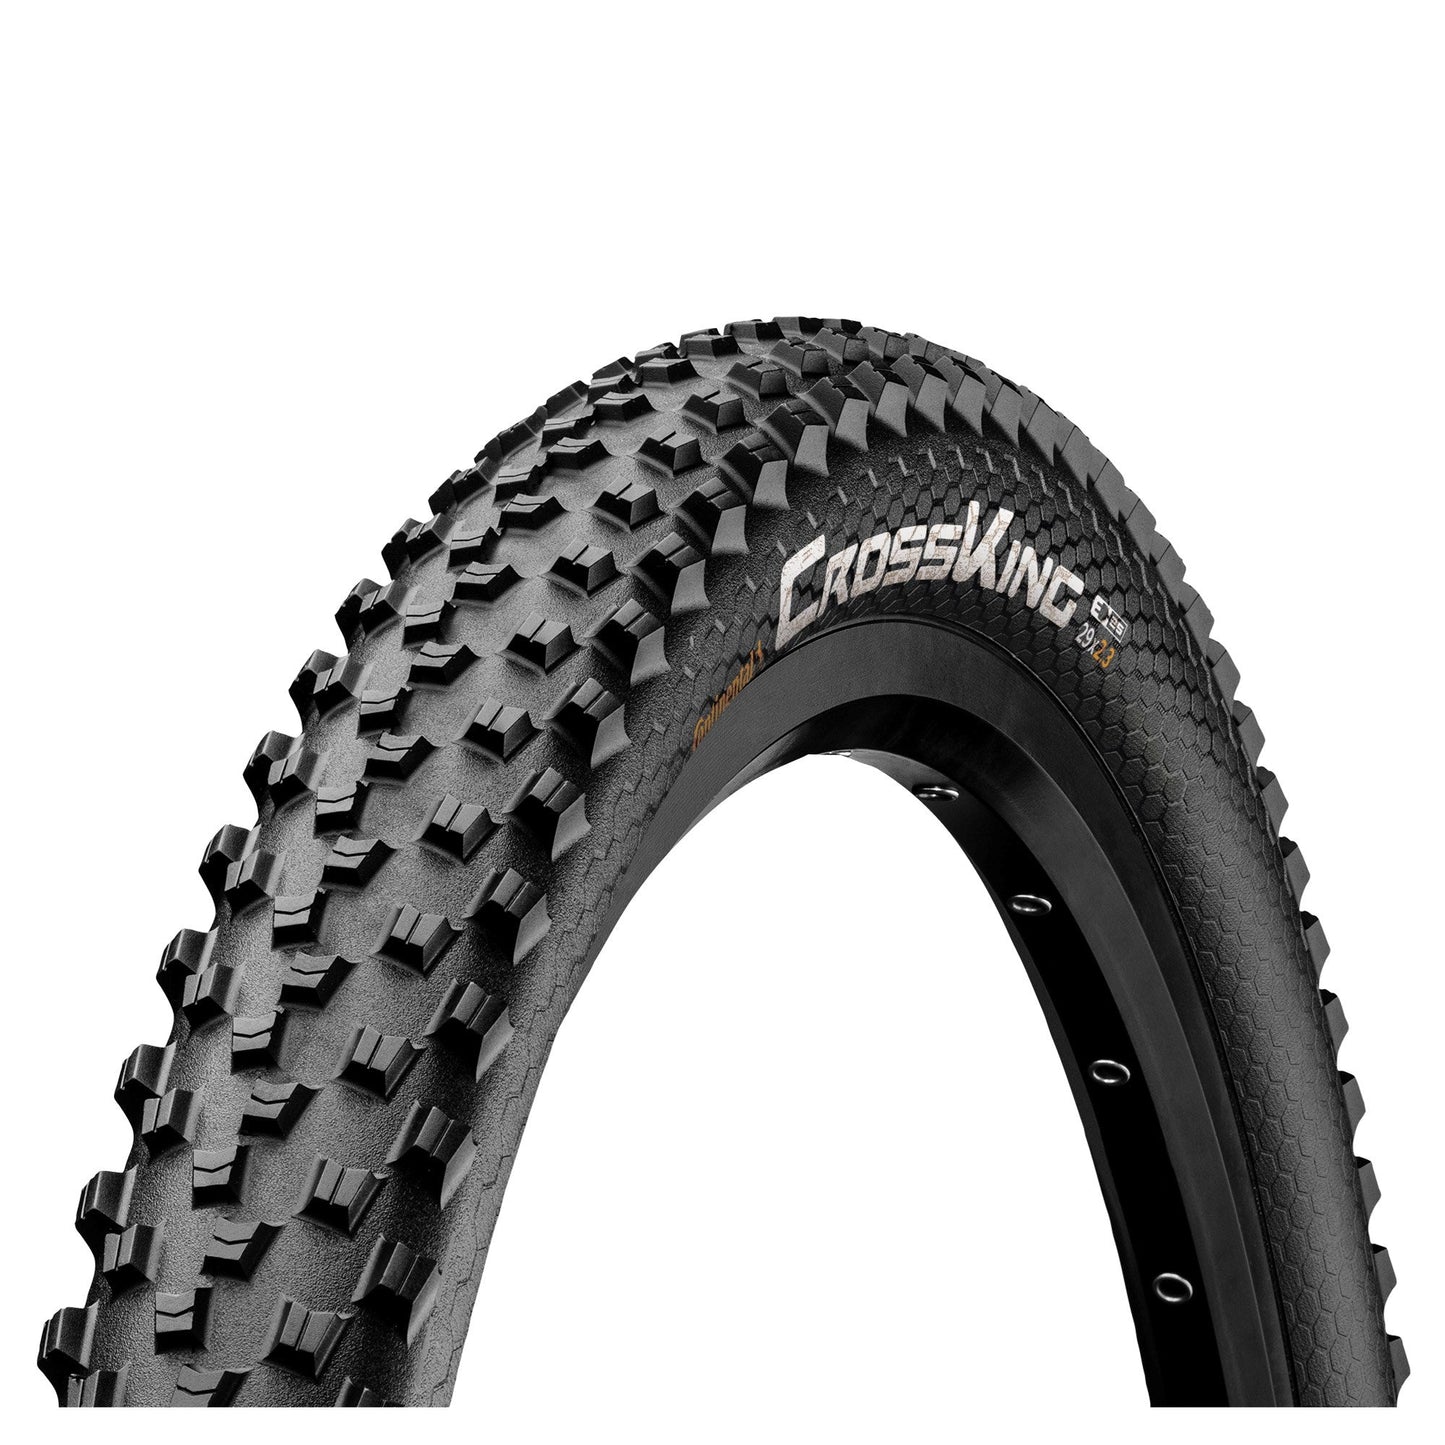 CONTINENTAL CROSS KING 27.5X2.00 WIRED TYRE